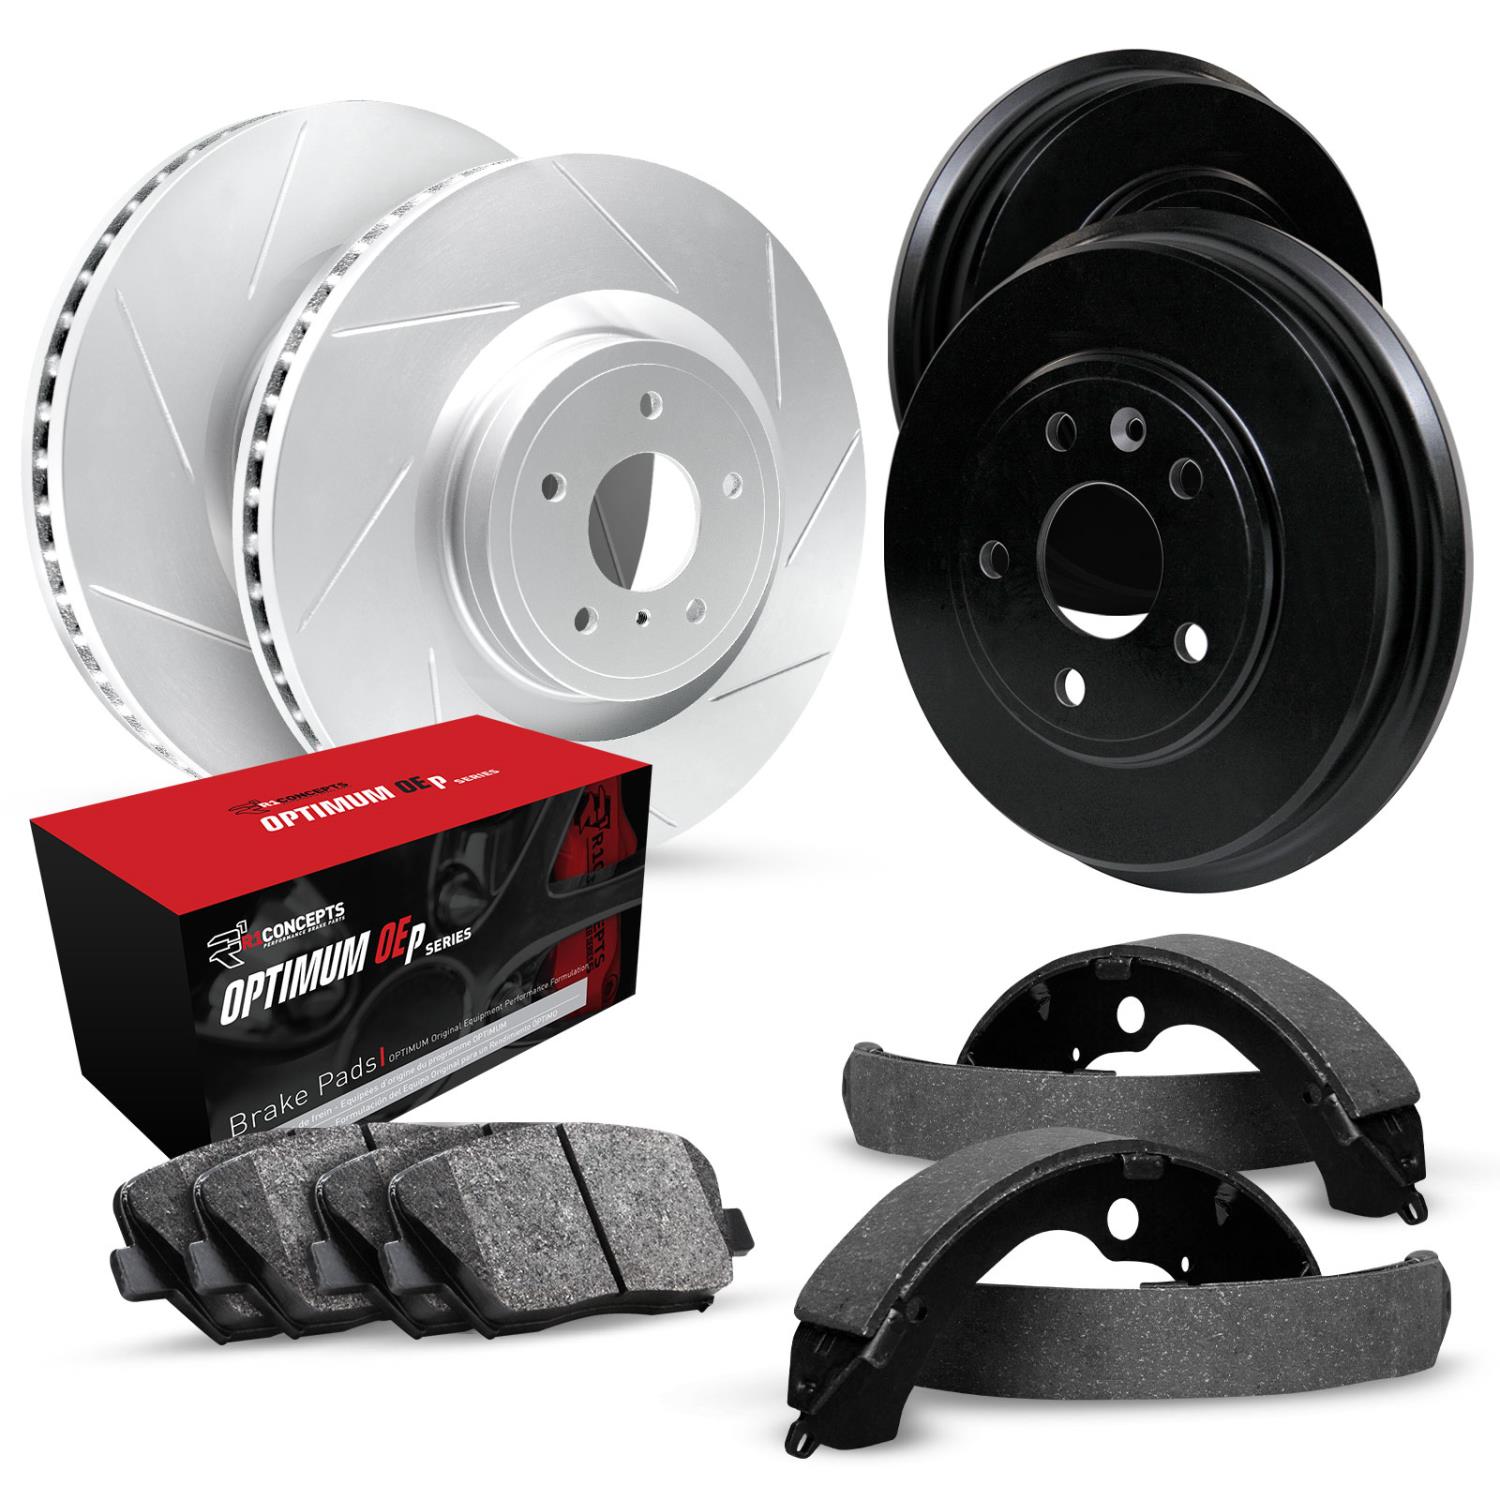 GEO-Carbon Slotted Brake Rotor & Drum Set w/Optimum OE Pads & Shoes, 1984-1986 Ford/Lincoln/Mercury/Mazda